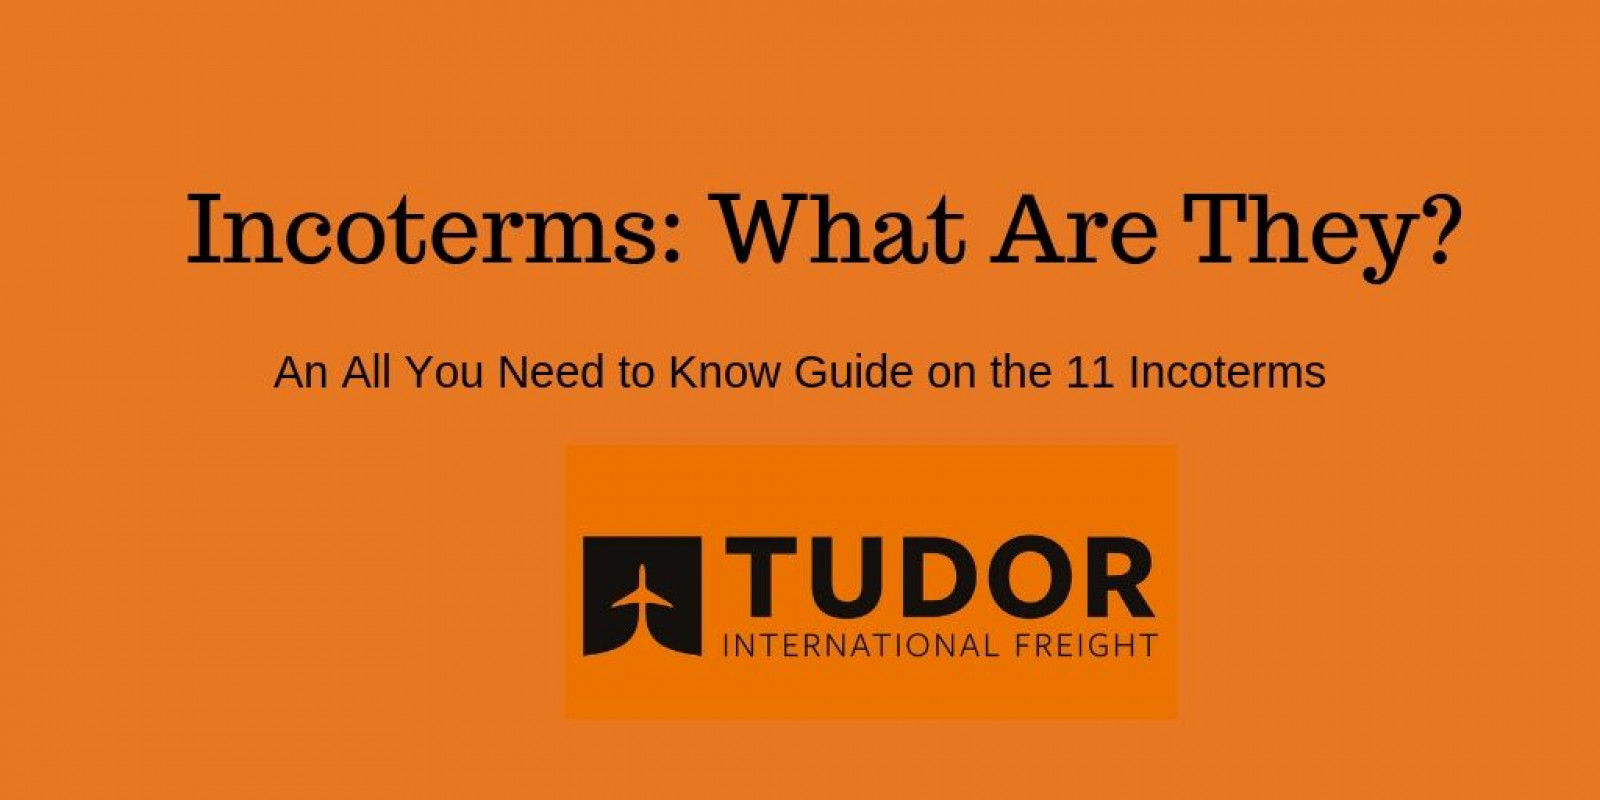 Incoterms: All You Need to Know